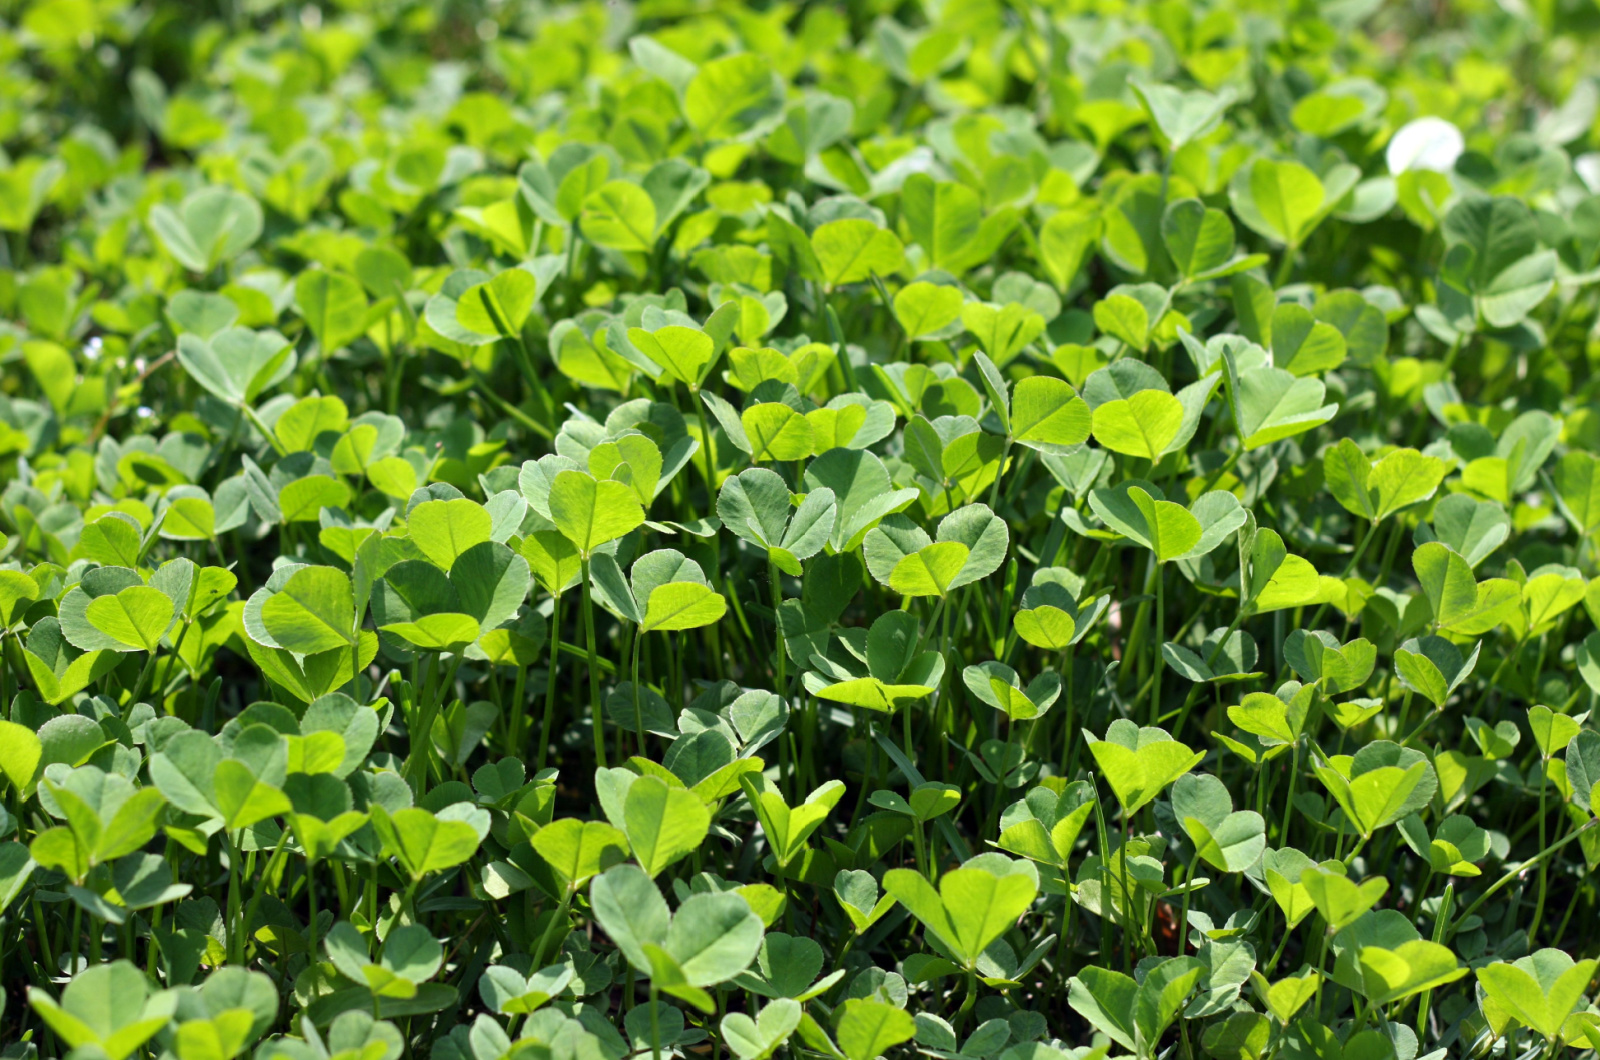 close-up photo of clover lawn